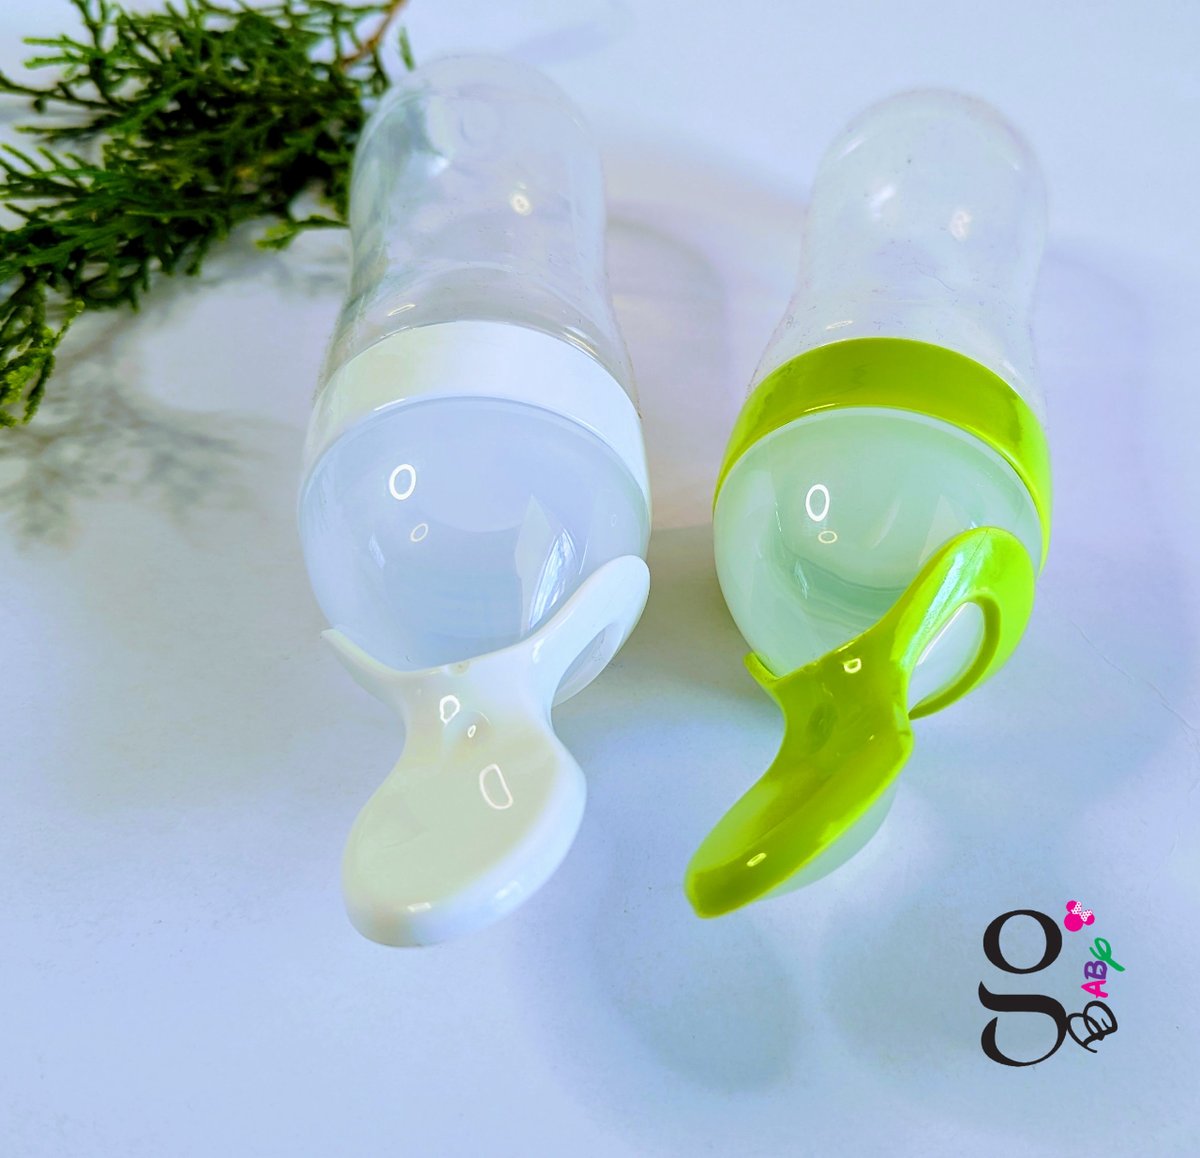 Experience pure feeding delight with our Silicone Bottle Feeder! 🍼✨. Because your kid deserves the best, this feeding system is designed to be simple and mess-free.

#SiliconeFeeder #BabyFeeding #MessFreeMoments #ParentingEssentials #BabyLove  #LimitedStock